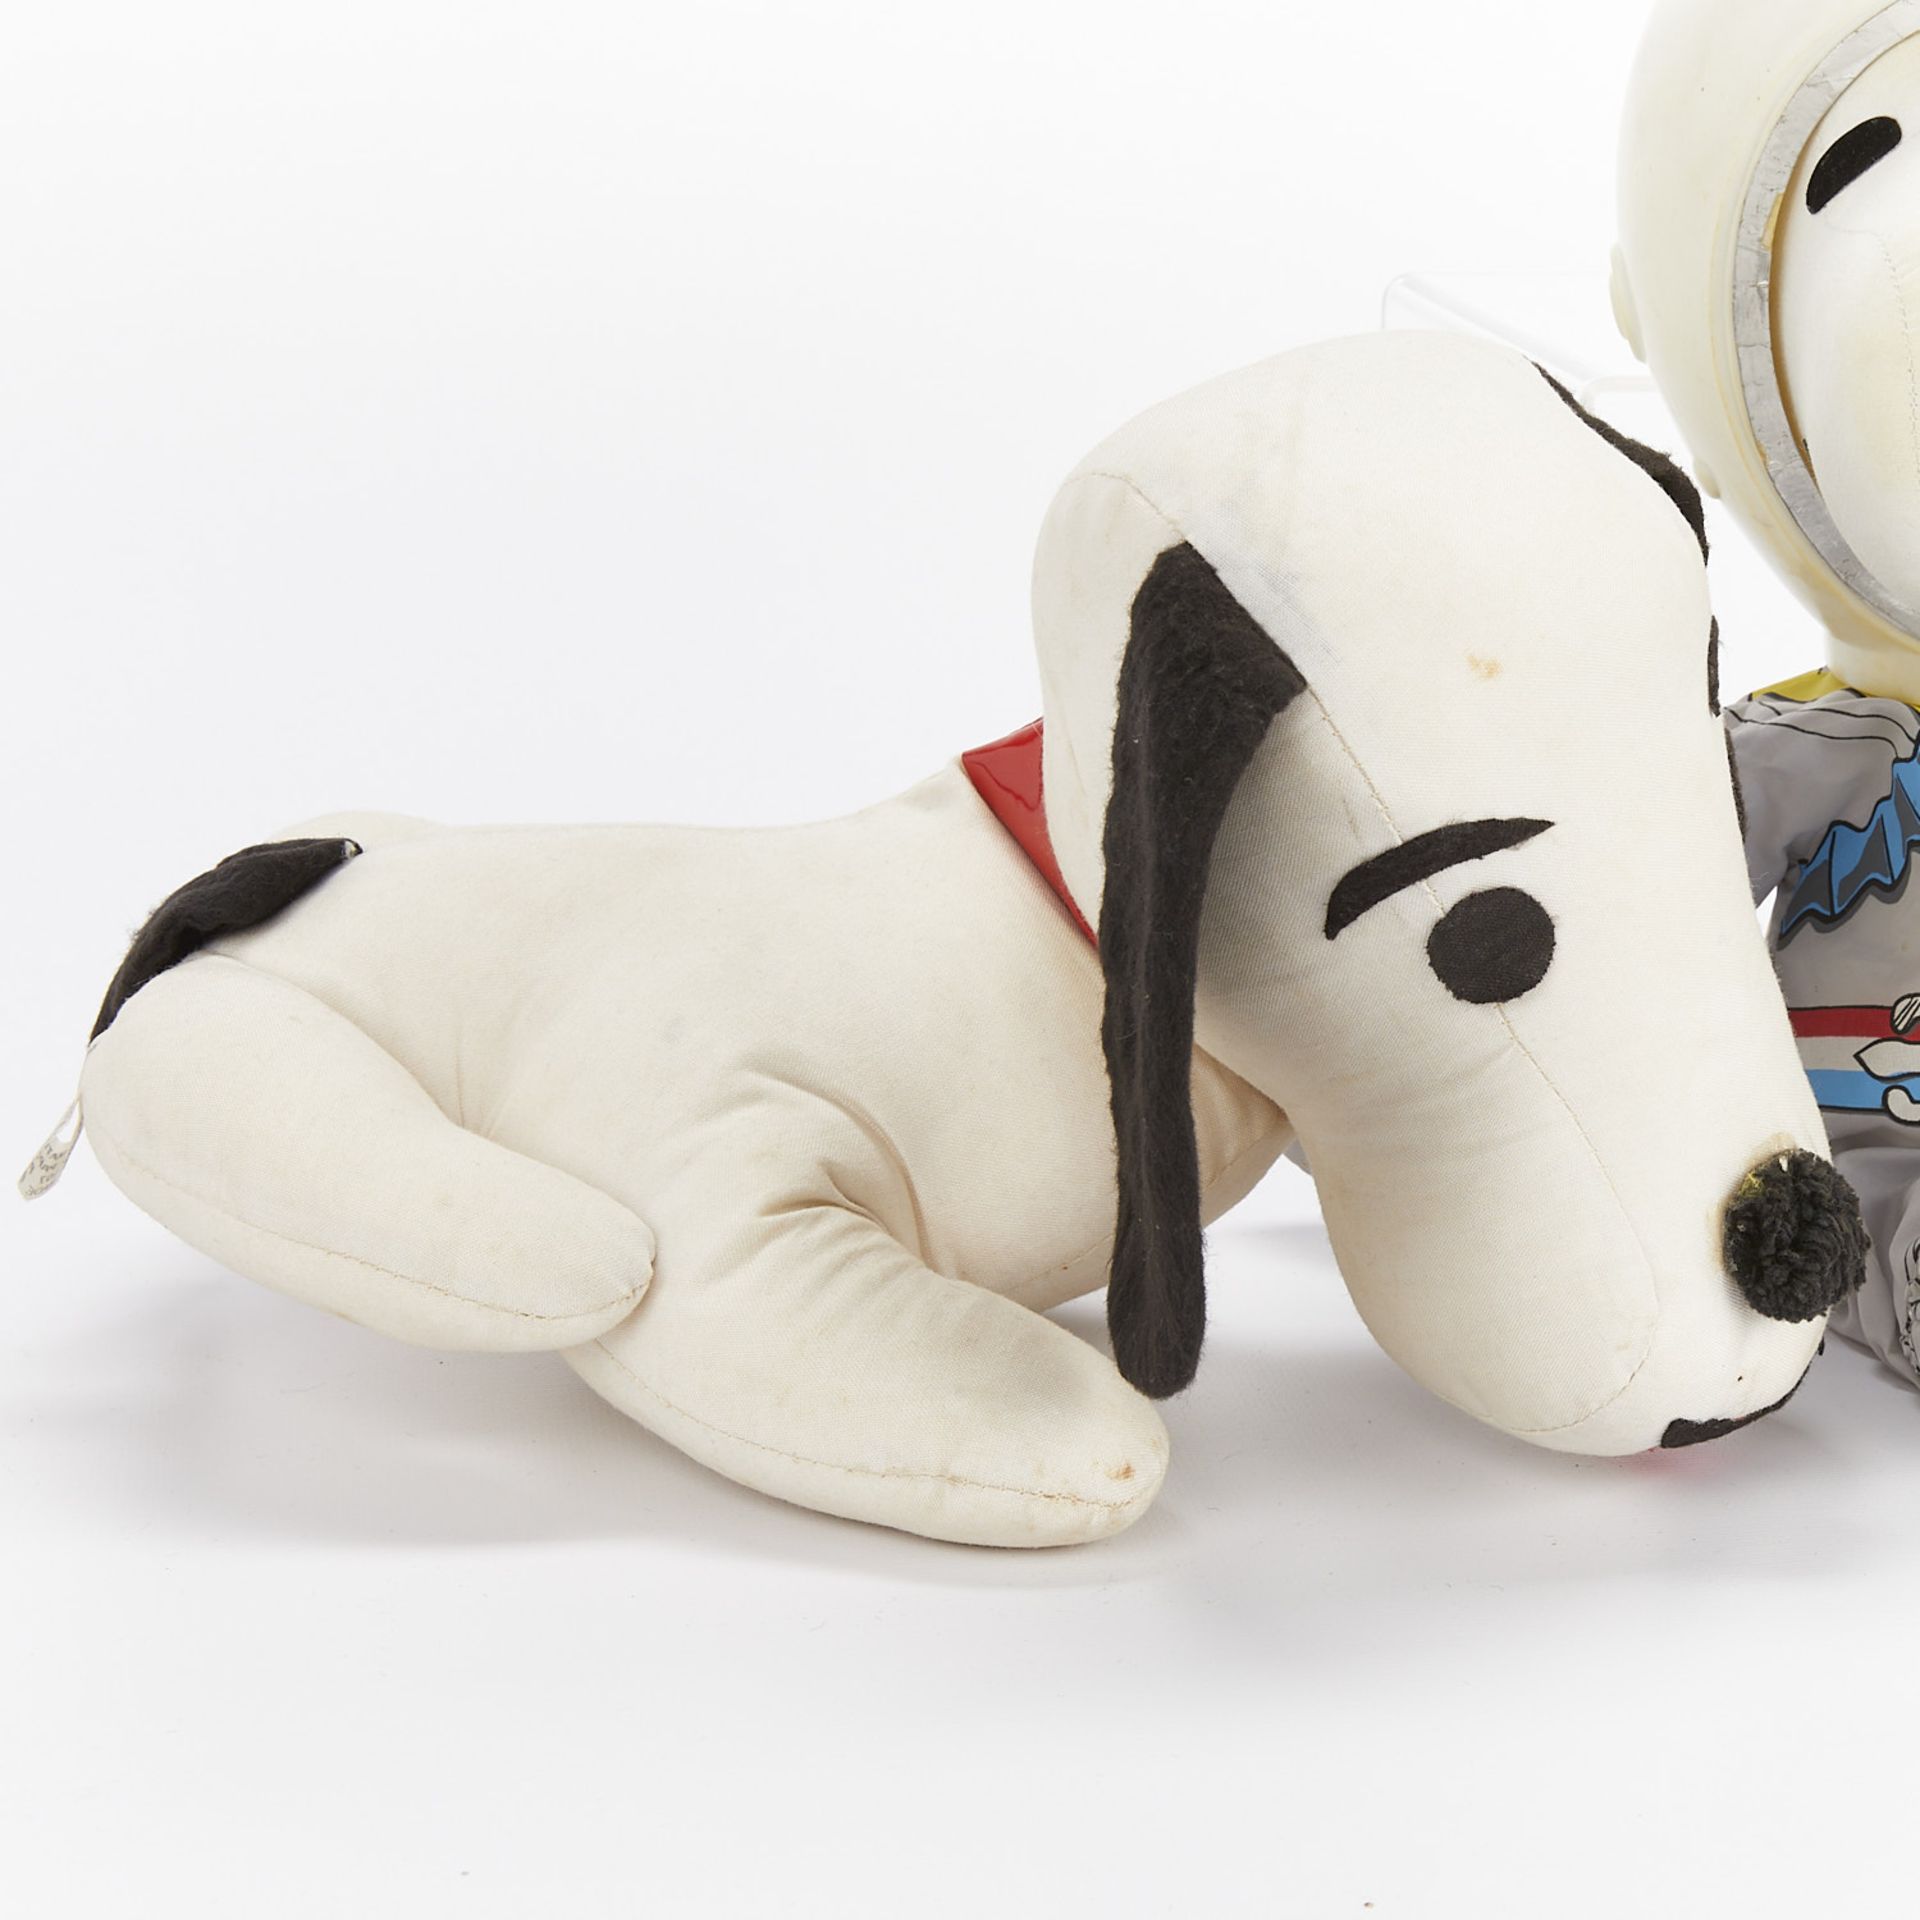 4 Vintage Dolls of Snoopy & Spike - Image 6 of 11